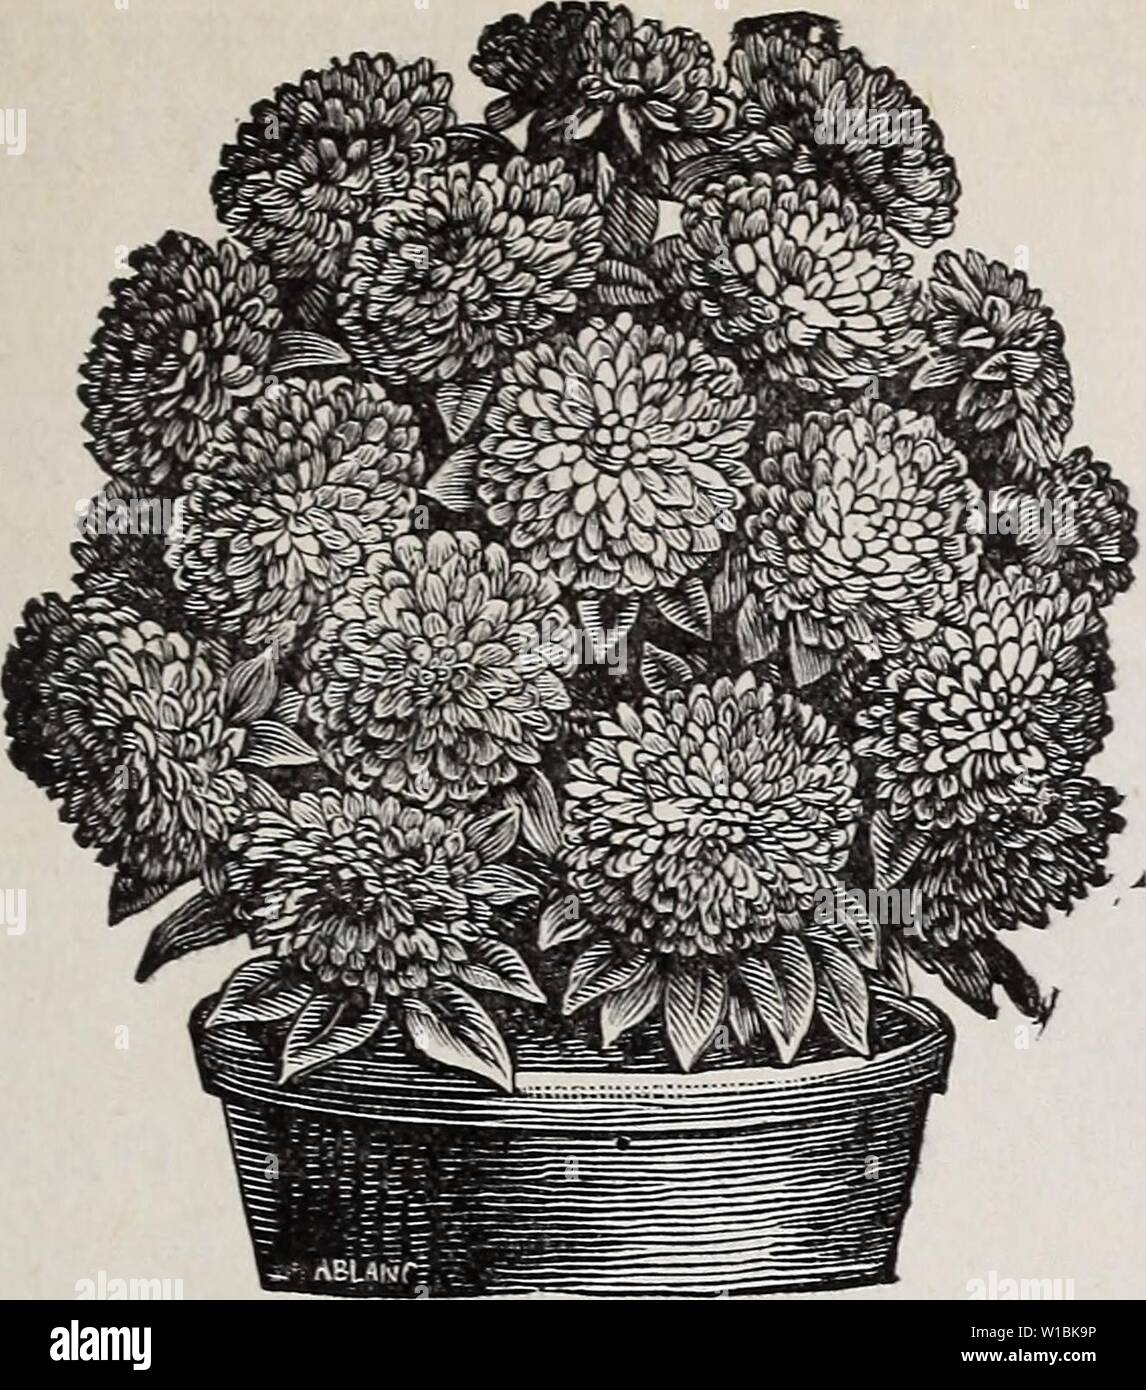 Archive image from page 42 of Descriptive catalogue of vegetable, flower,. Descriptive catalogue of vegetable, flower, and farm seeds : bulbs, roots, plants, tools . descriptivecatal1894weeb Year: 1894  WEEBER & DON.-NOVELTIES AND SPECIALTIES IN FLOWER SEEDS. 39    Betteridge's Quilled Aster, Sulphur Yellow. Remarkably handsome variety of this freeWooming class. The flowers, being globular, quilled and very double, show the most clearly pronounced yellow ever known amongst Asters. Per pkt. 20 cts. White Perfection Balsam. The seed we offer has been saved from a magnificent strain of dwarf Doub Stock Photo